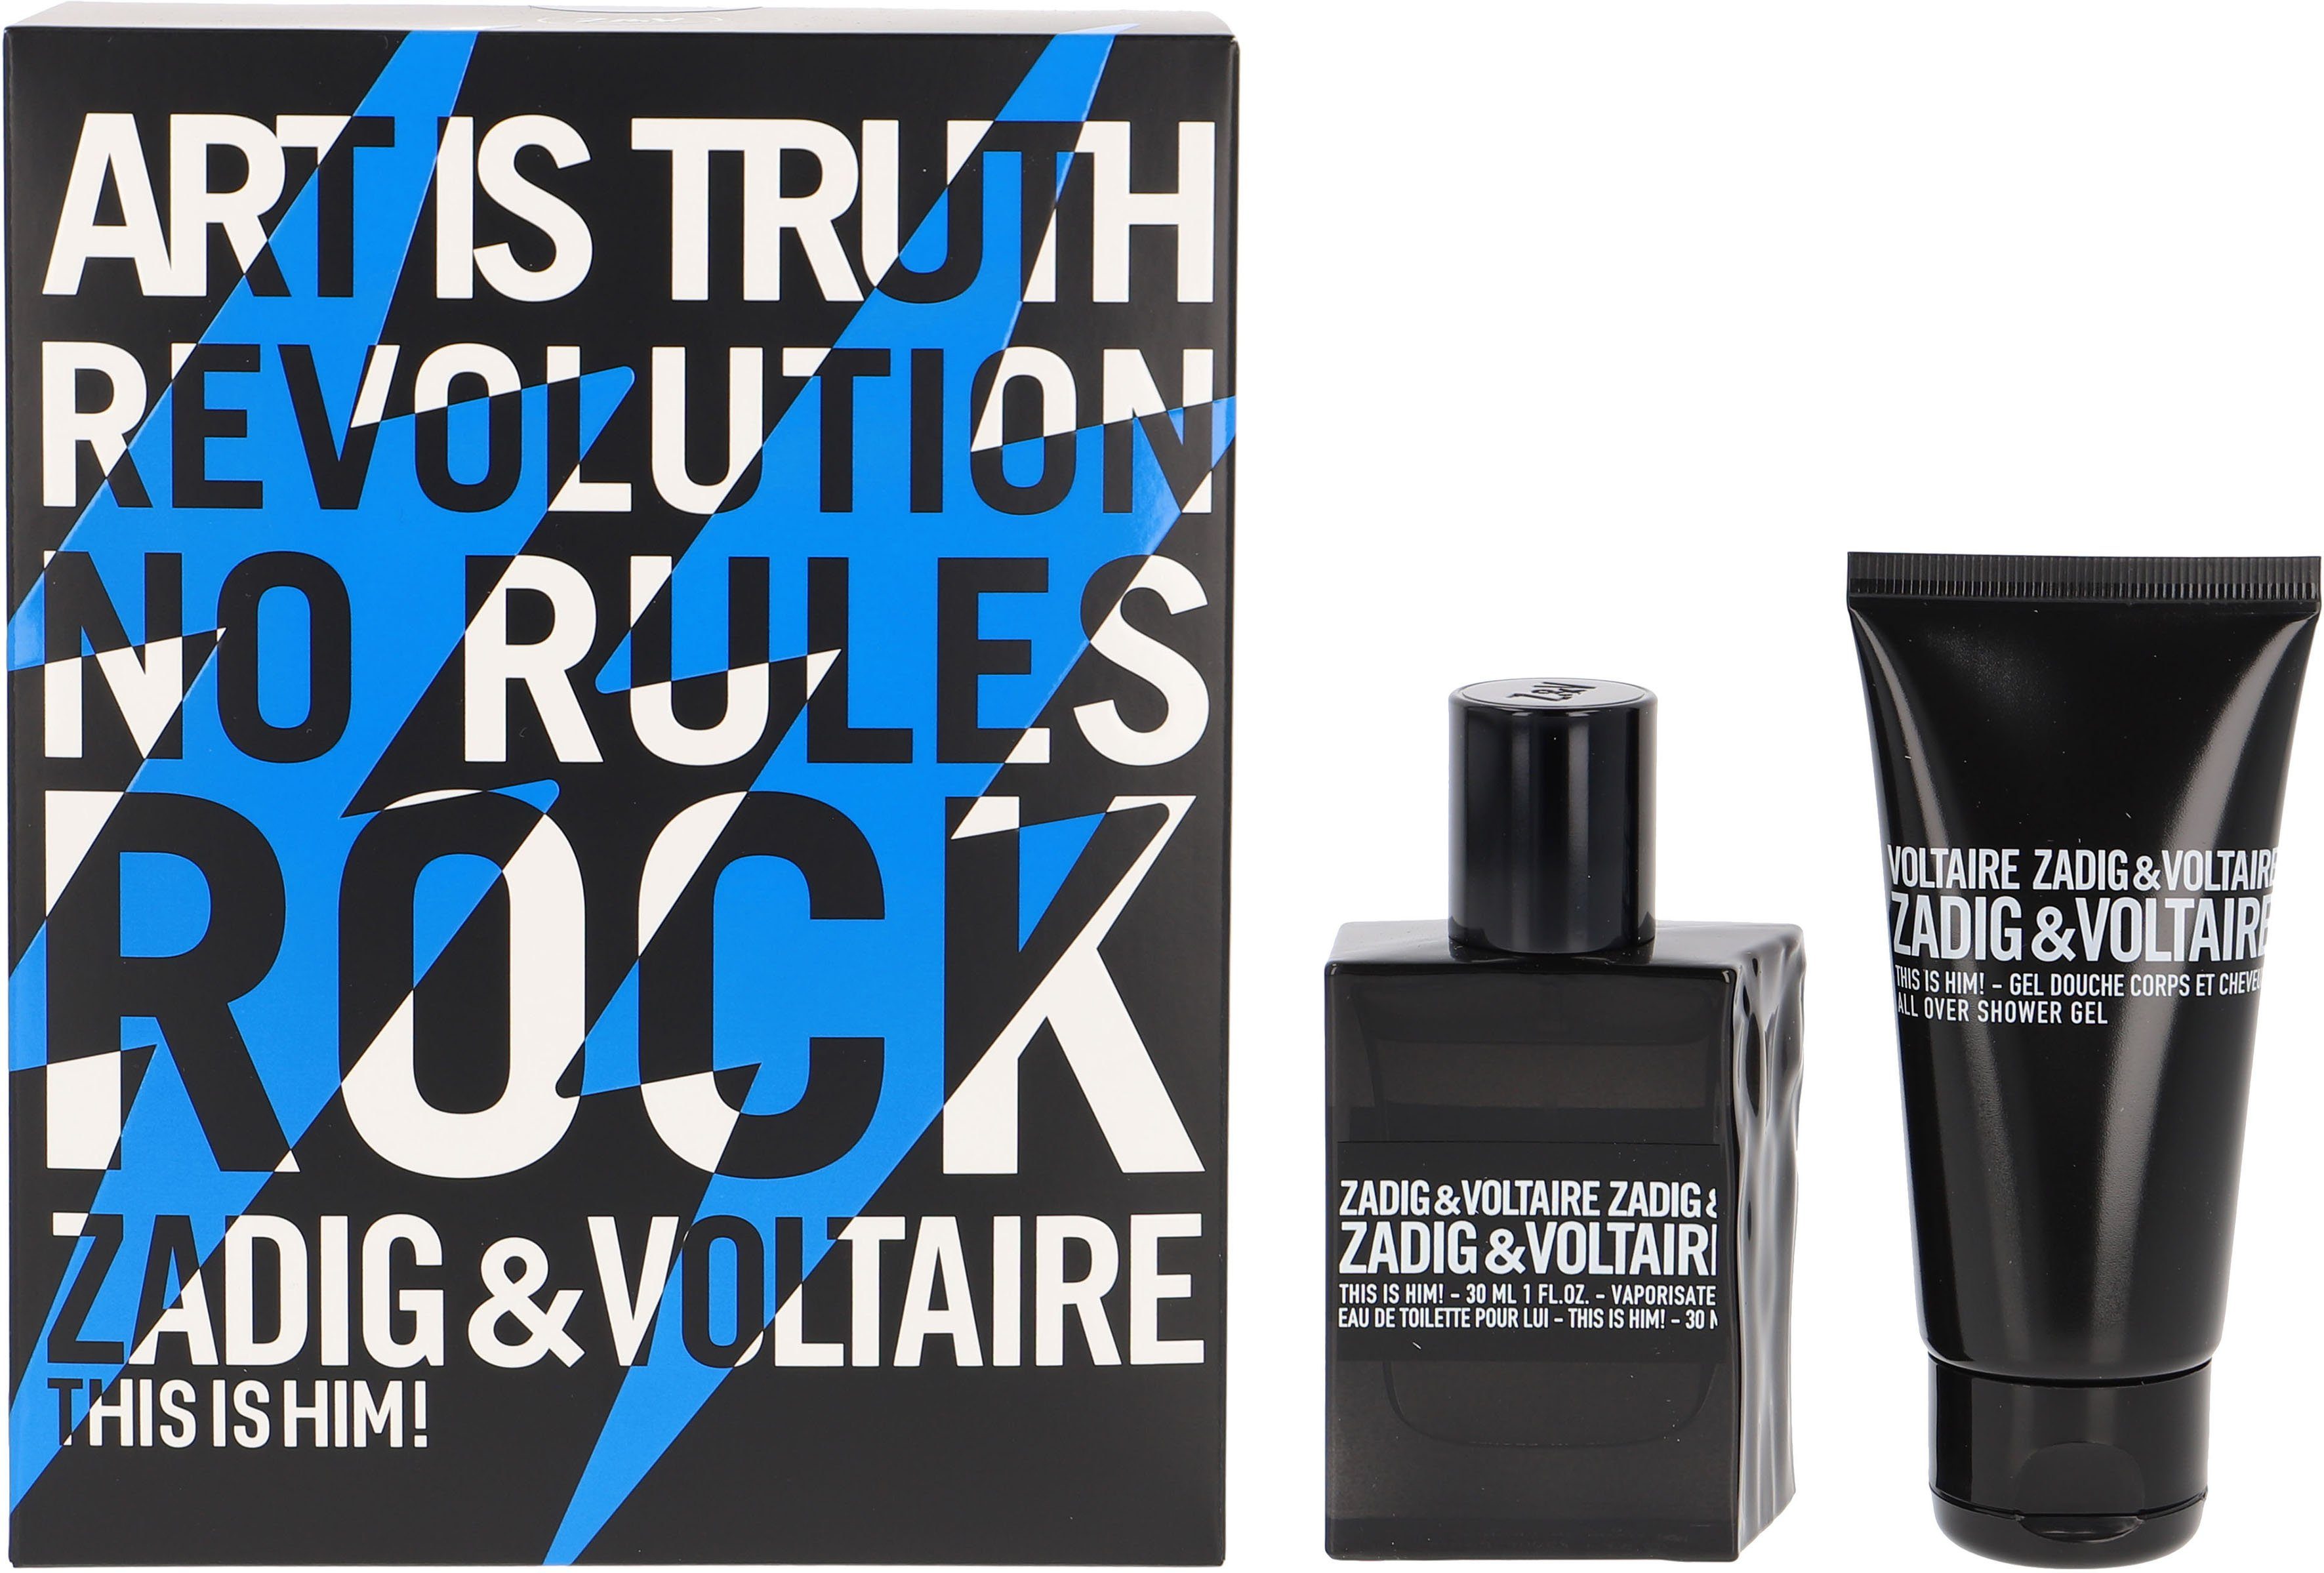 2-tlg. Him!, Duft-Set This & ZADIG is VOLTAIRE